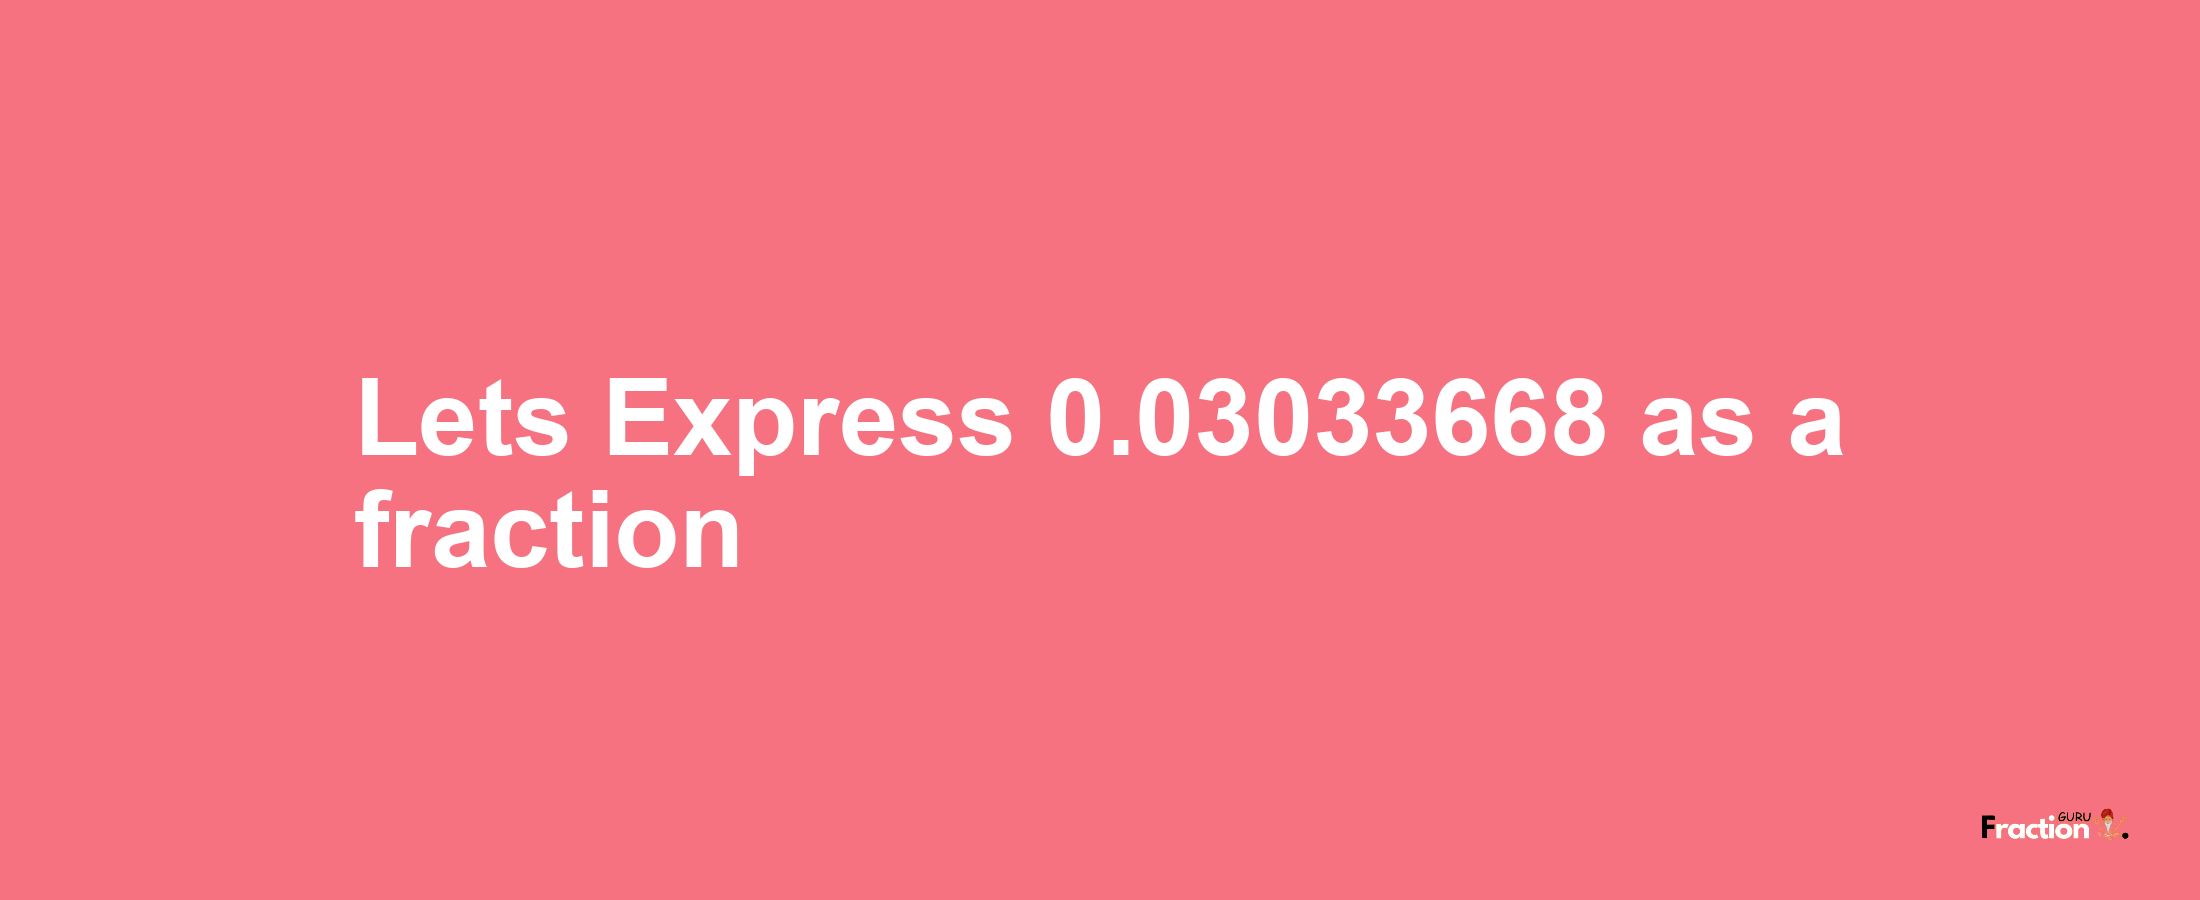 Lets Express 0.03033668 as afraction